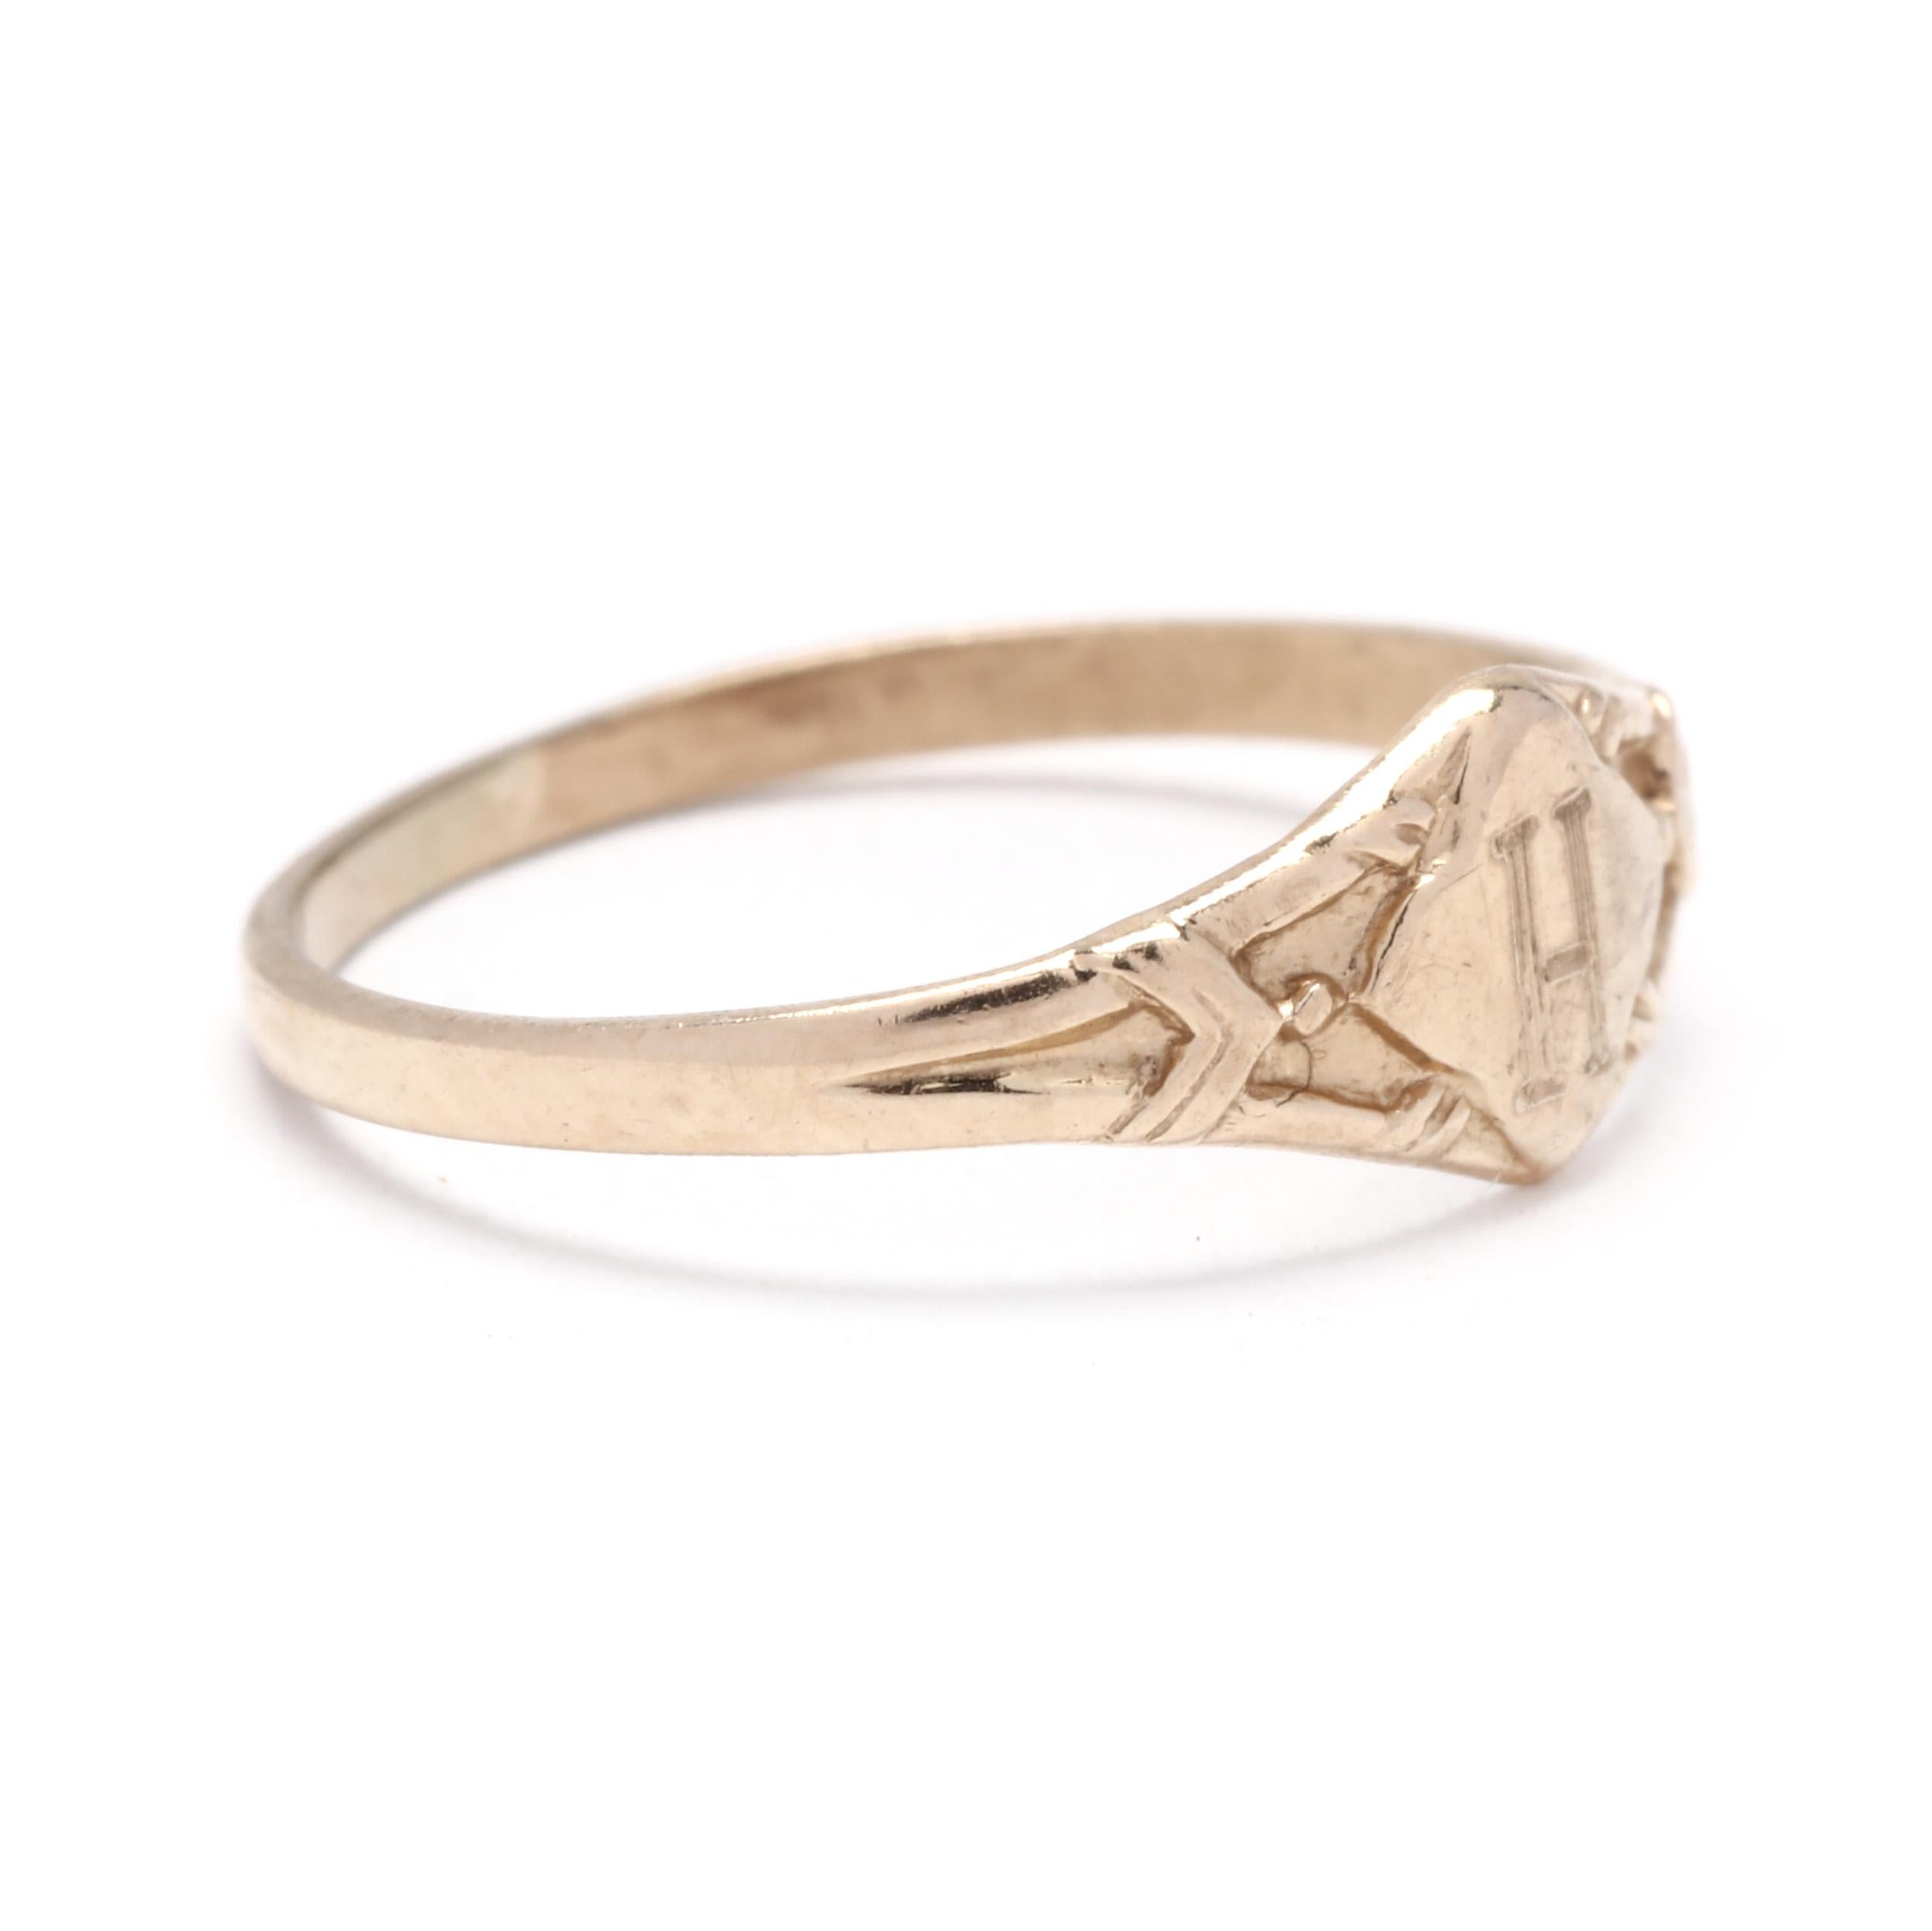 A vintage 10 karat yellow gold H initial baby signet ring. This initial midi signet ring features a tapered design with a  central clover motif engraved with an H and applied gold detailing to the band.

Ring Size 2

Rise Off Of Finger: 1 mm

Width: